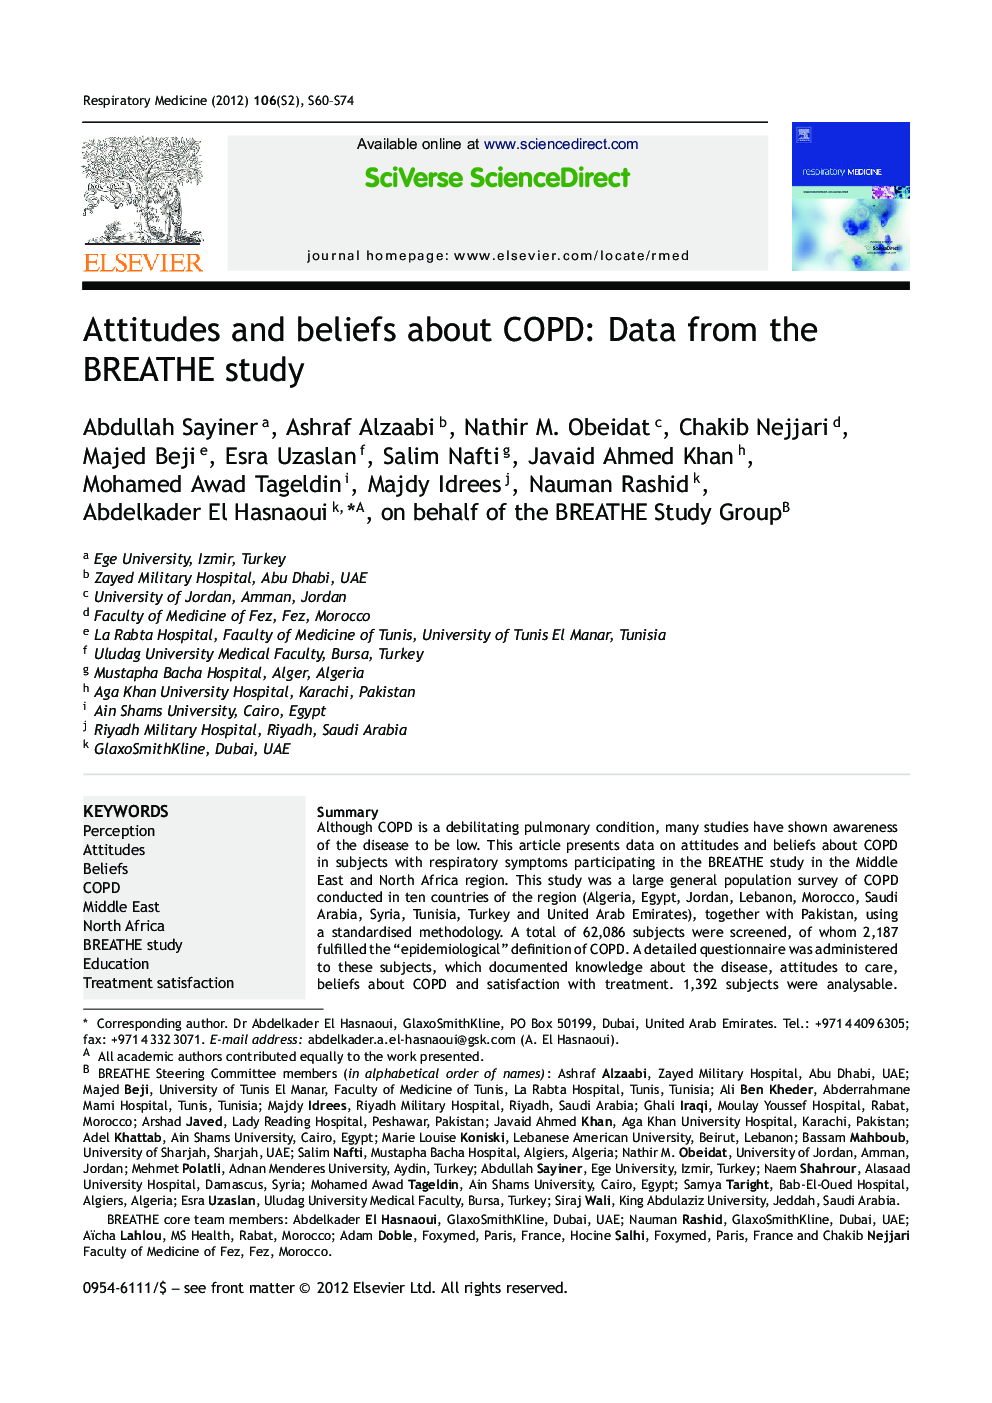 Attitudes and beliefs about COPD: Data from the BREATHE study 